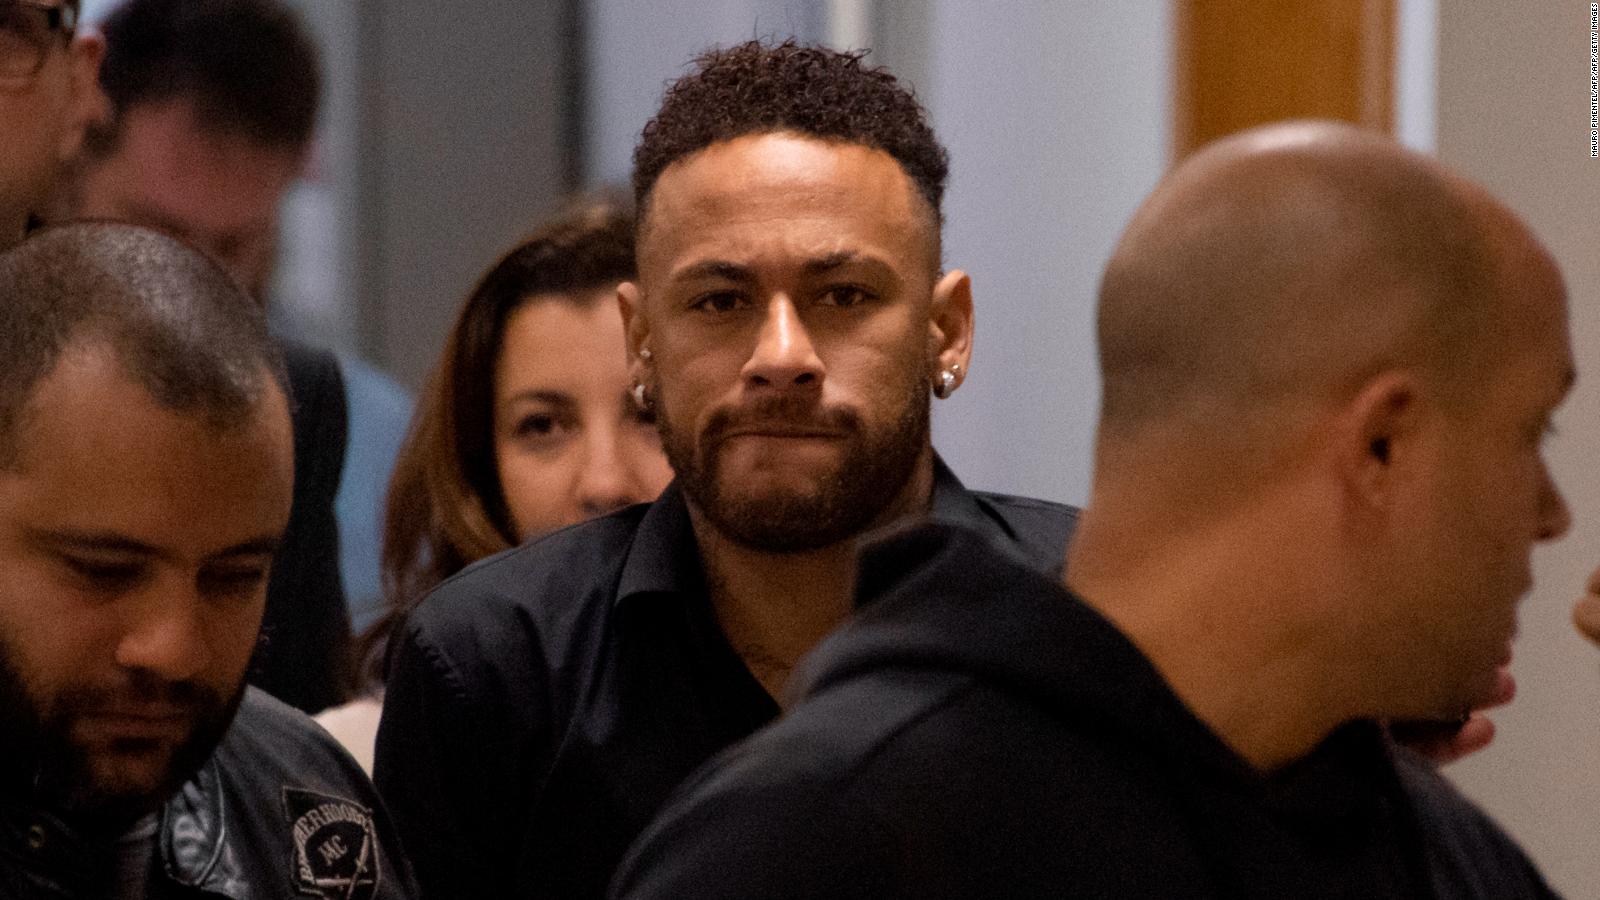 Nike Cut Ties With Neymar Over His Refusal To Cooperate In Sexual Assault Investigation Cnn